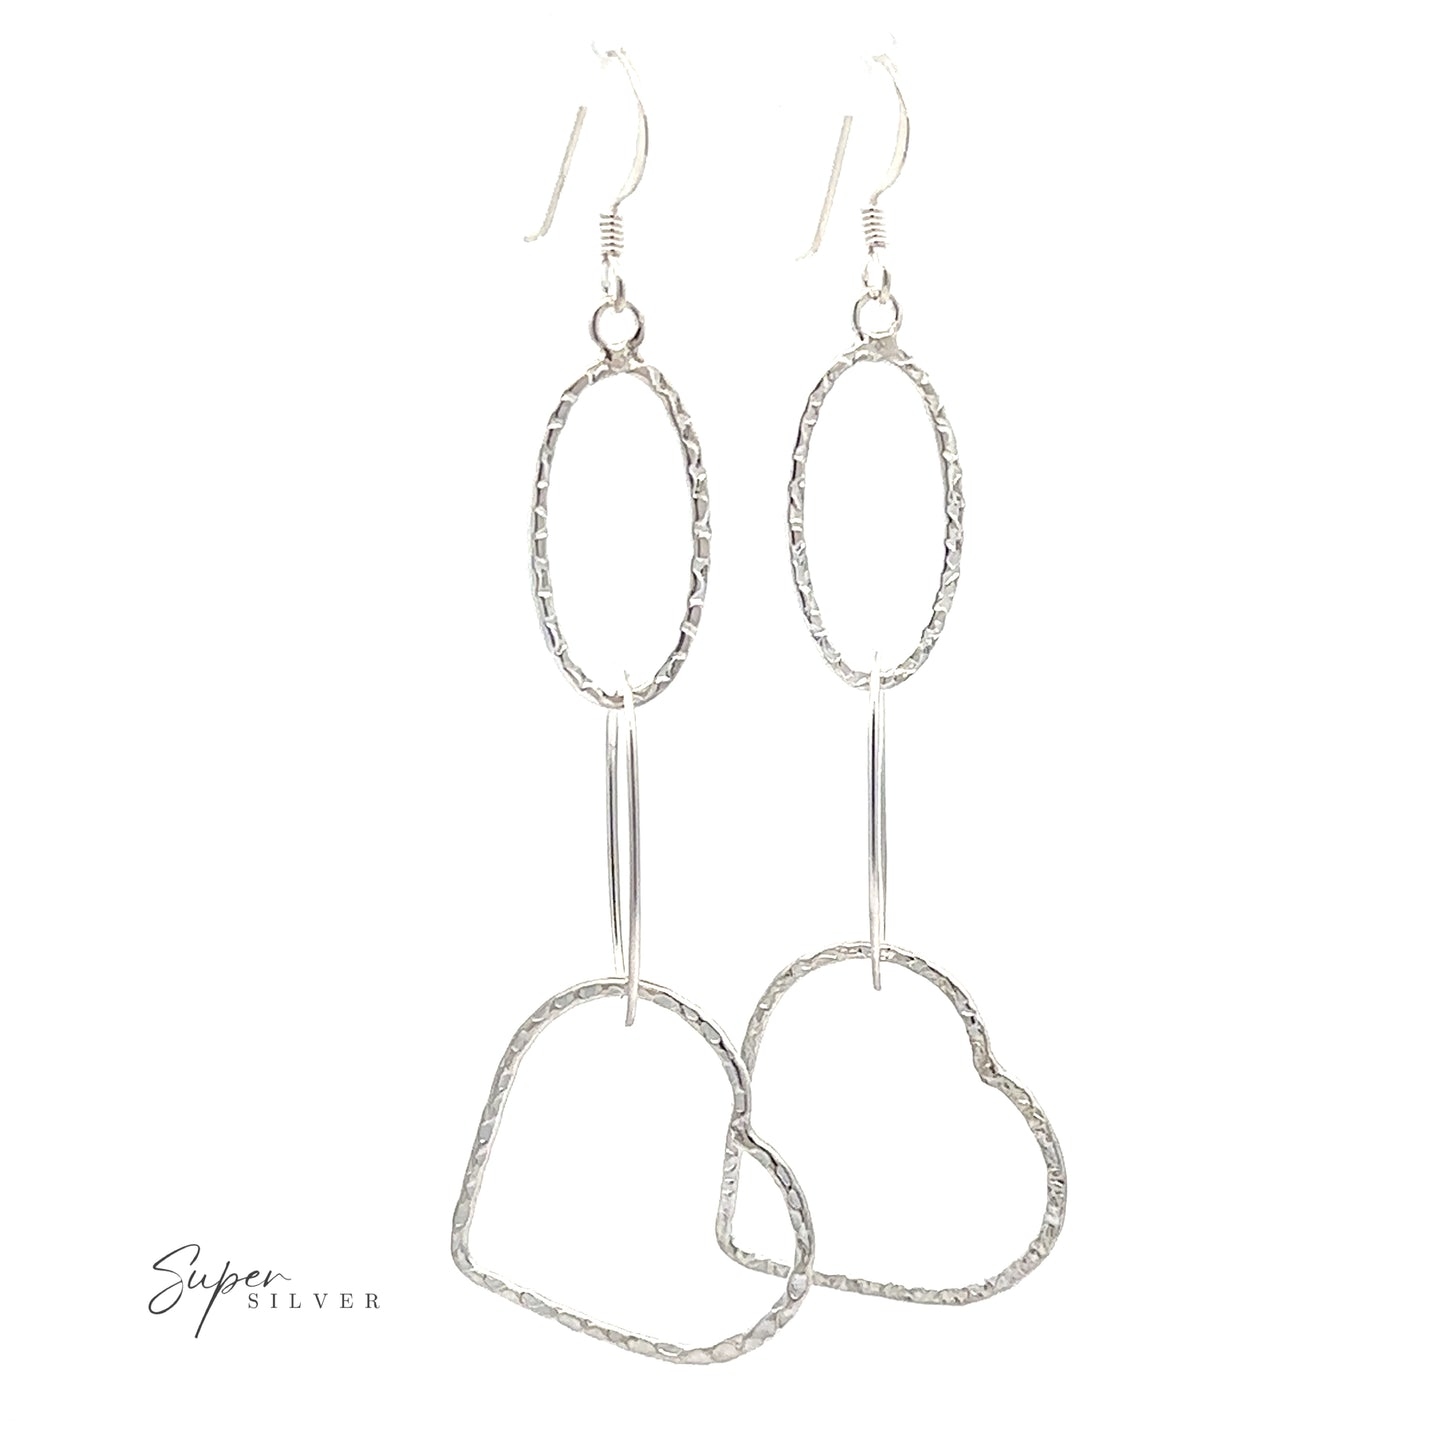 A pair of Hammered Three Tiered Heart Dangle Earrings on a white background.